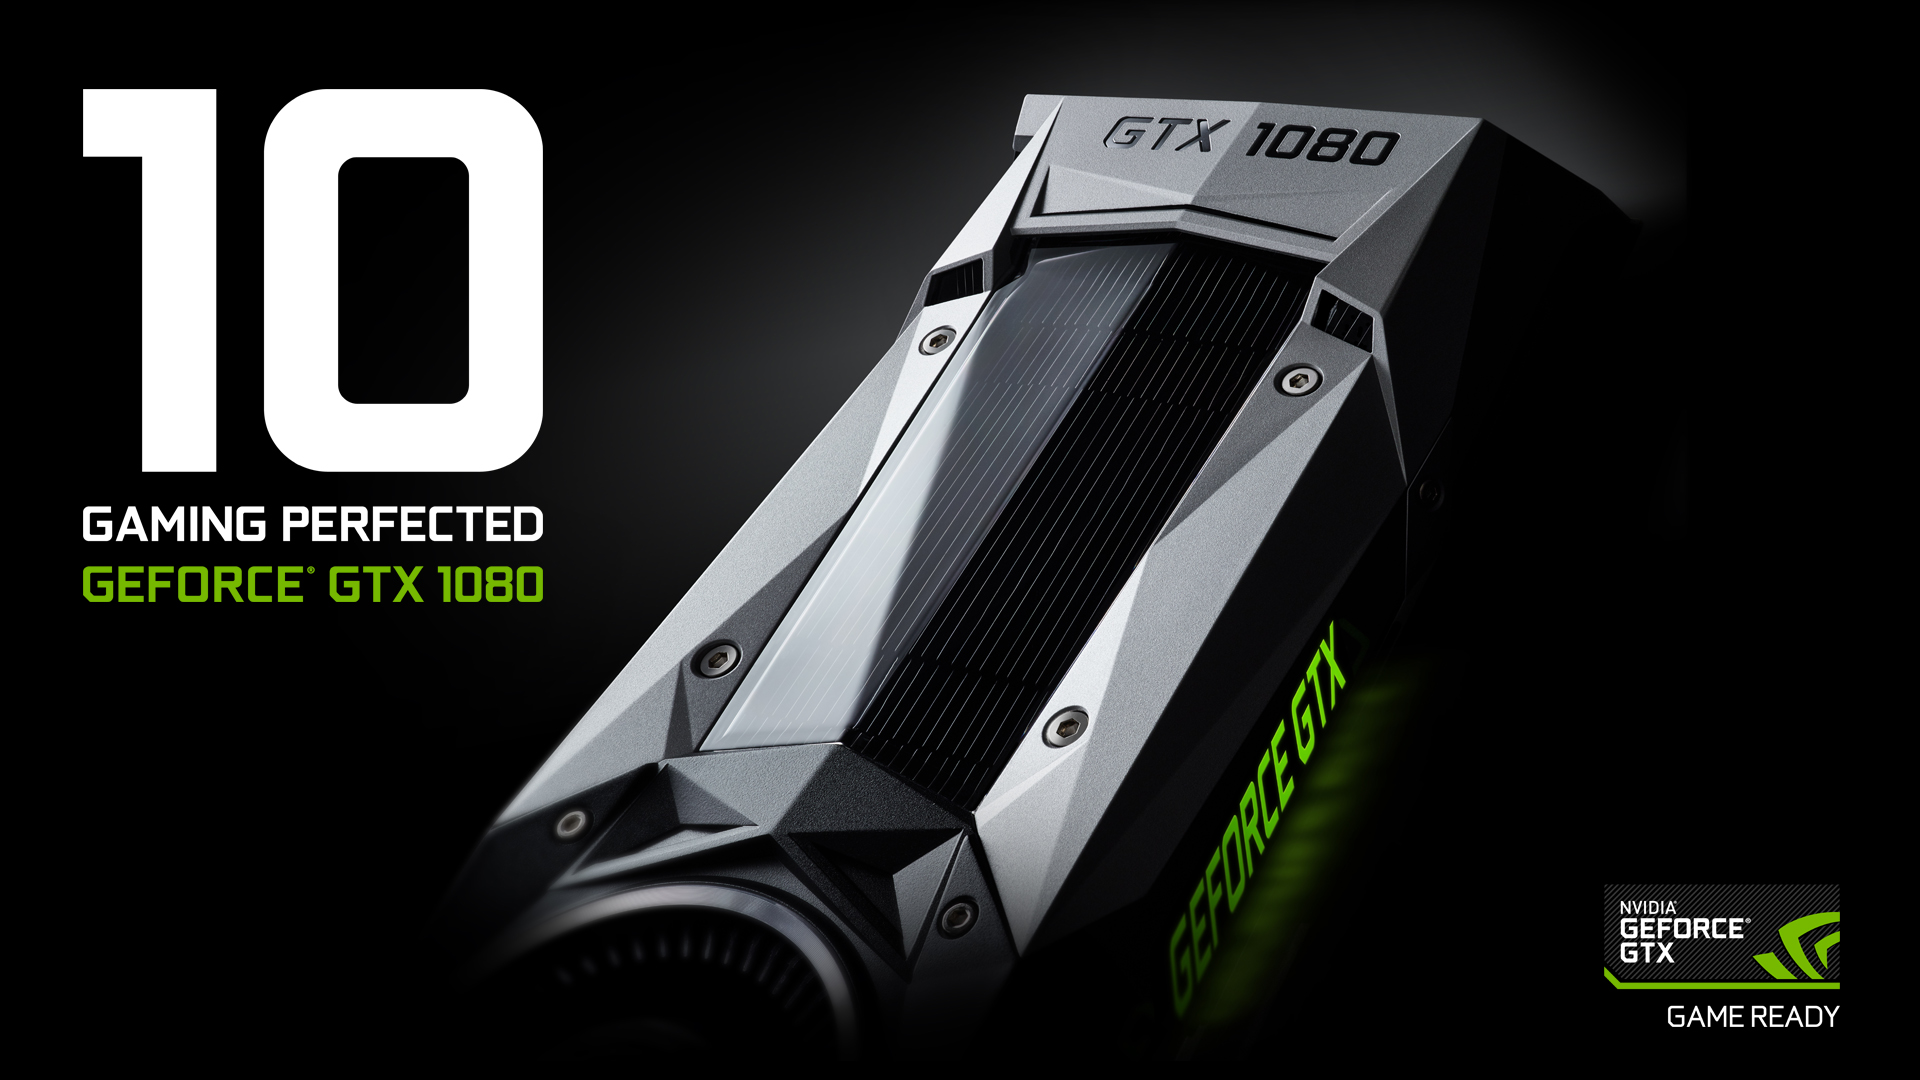 Introducing The Geforce Gtx 1080 Gaming Perfected